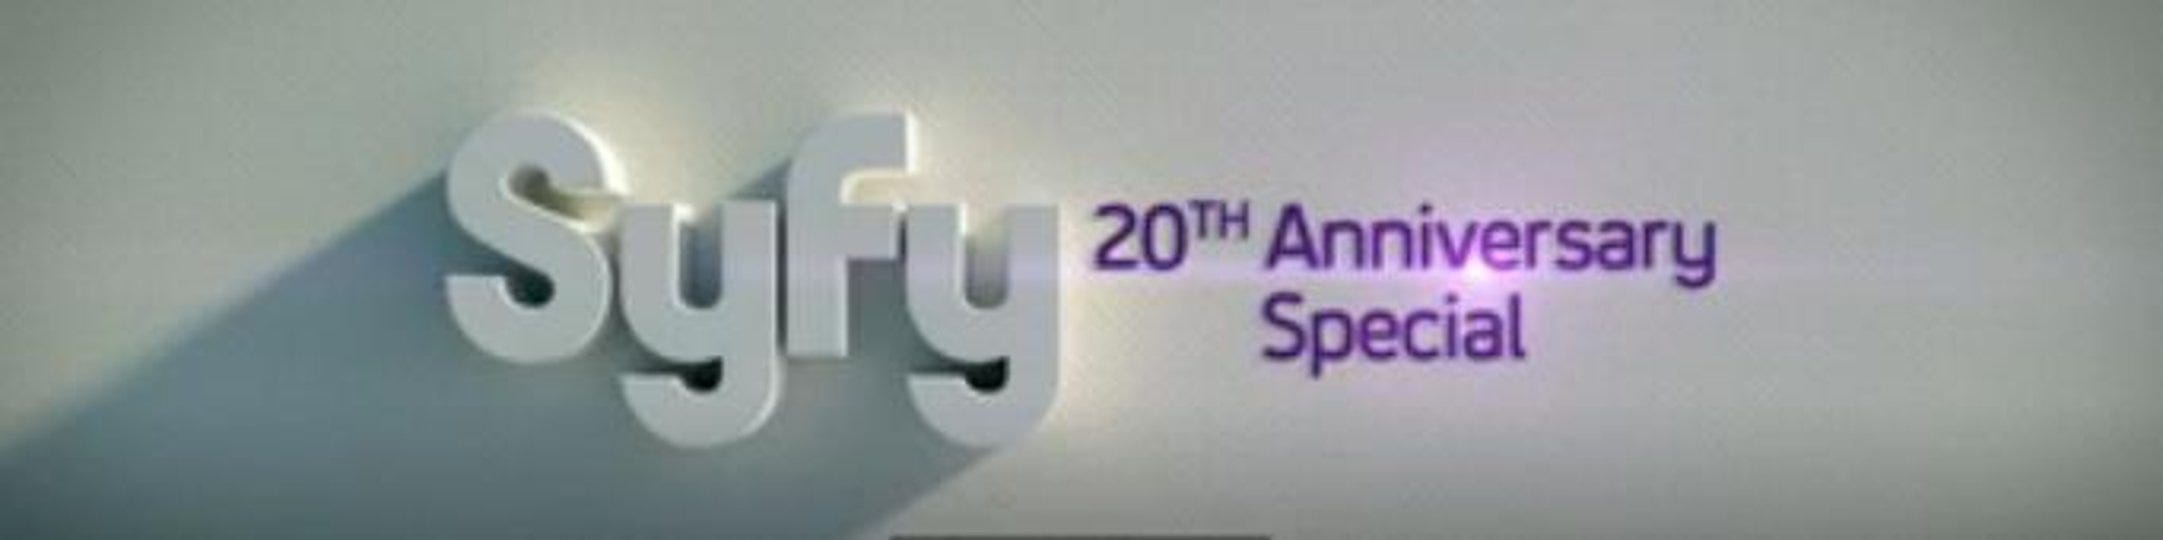 syfy-20th-anniversary-special-1383402-1